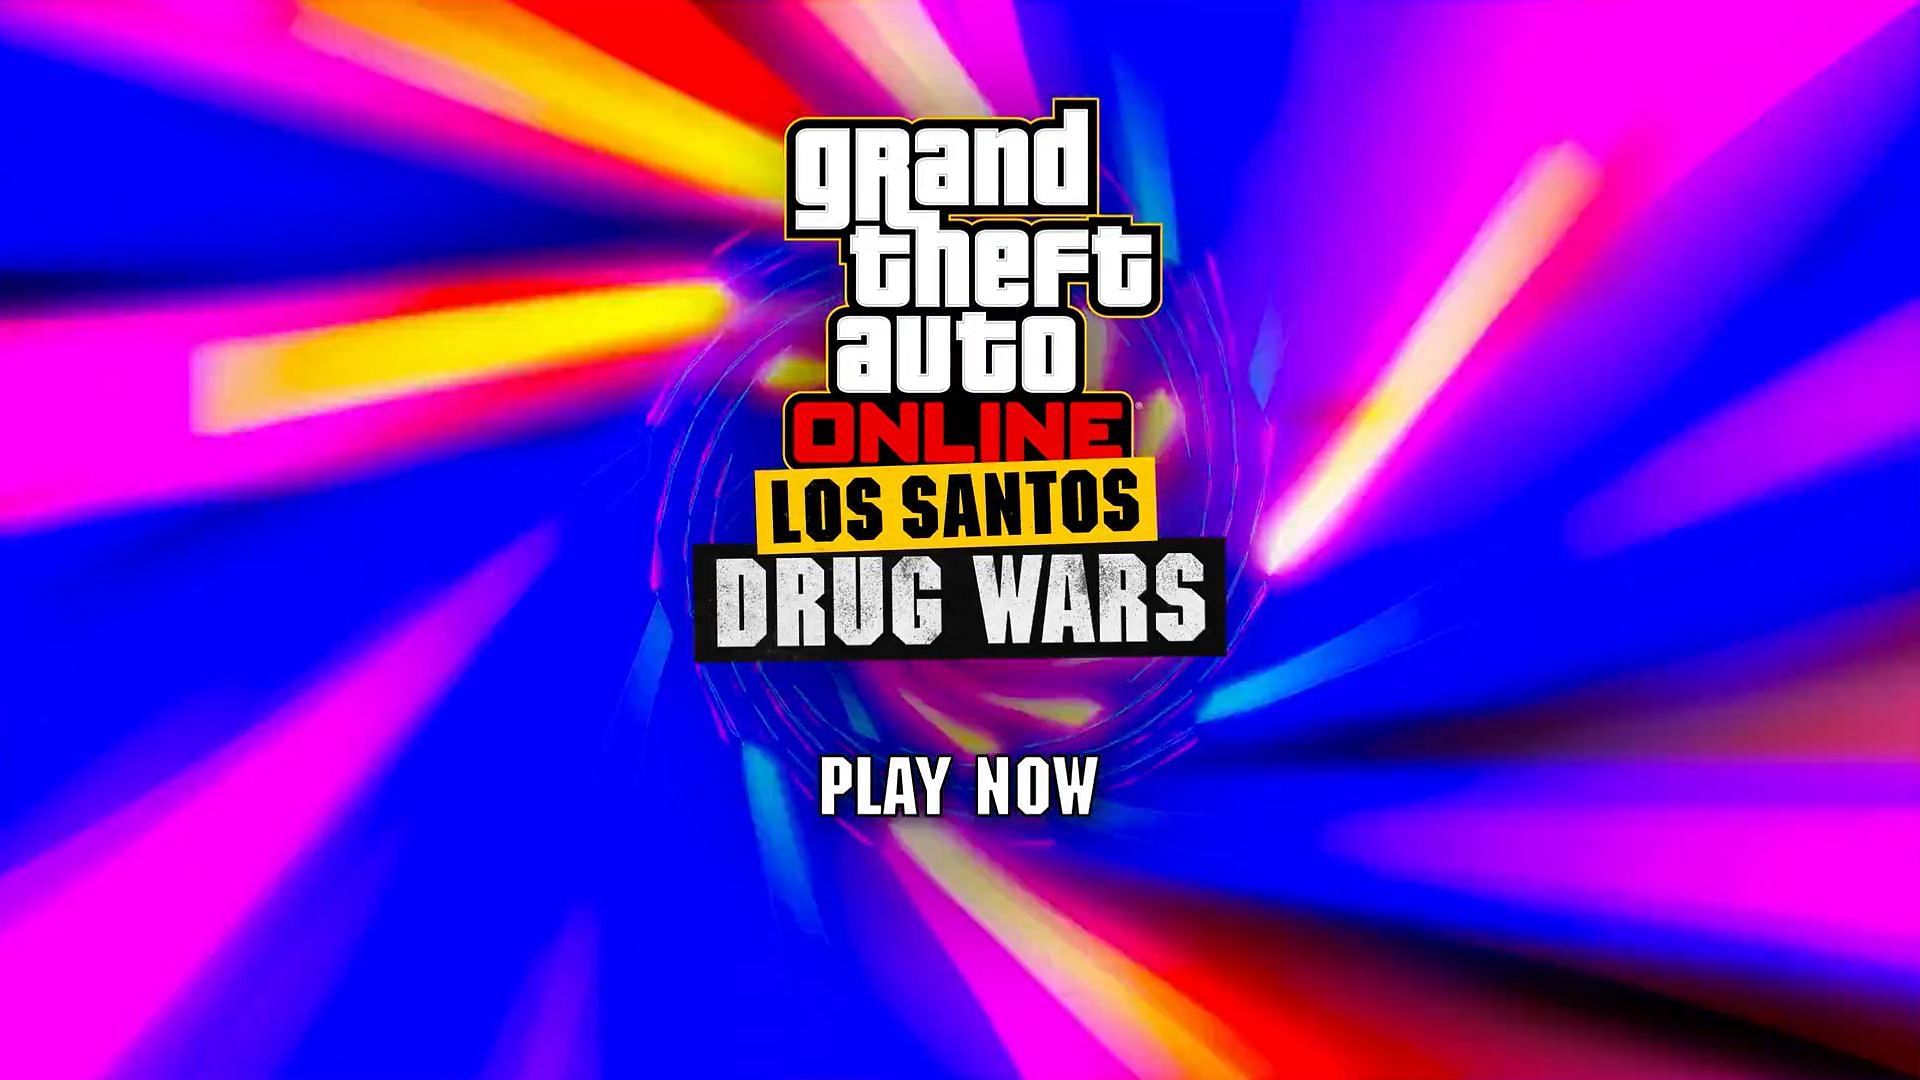 A brief about the new GTA Online Los Santos Drug Wars update trailer launched by Rockstar Games (Image via Rockstar Games)